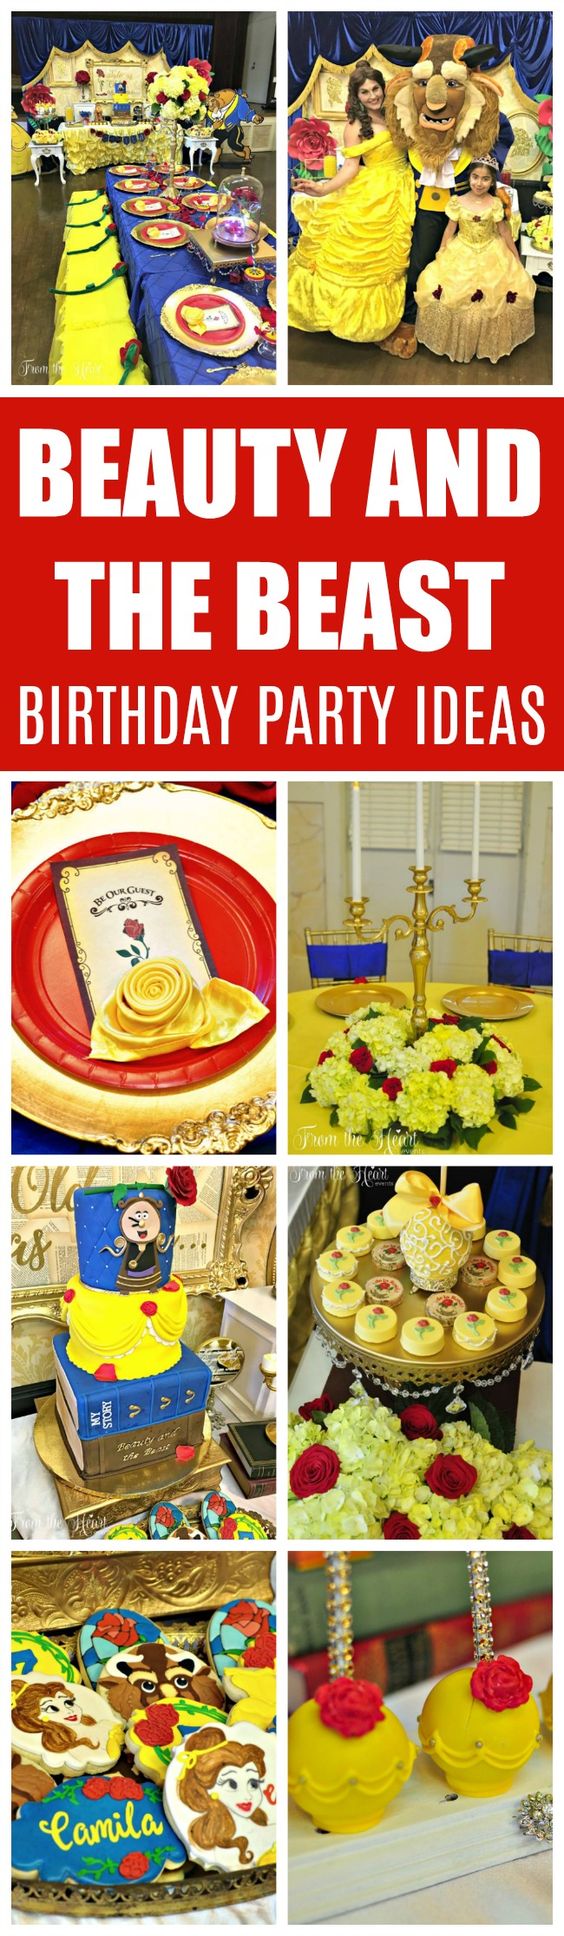 Beauty and the Beast Birthday Party